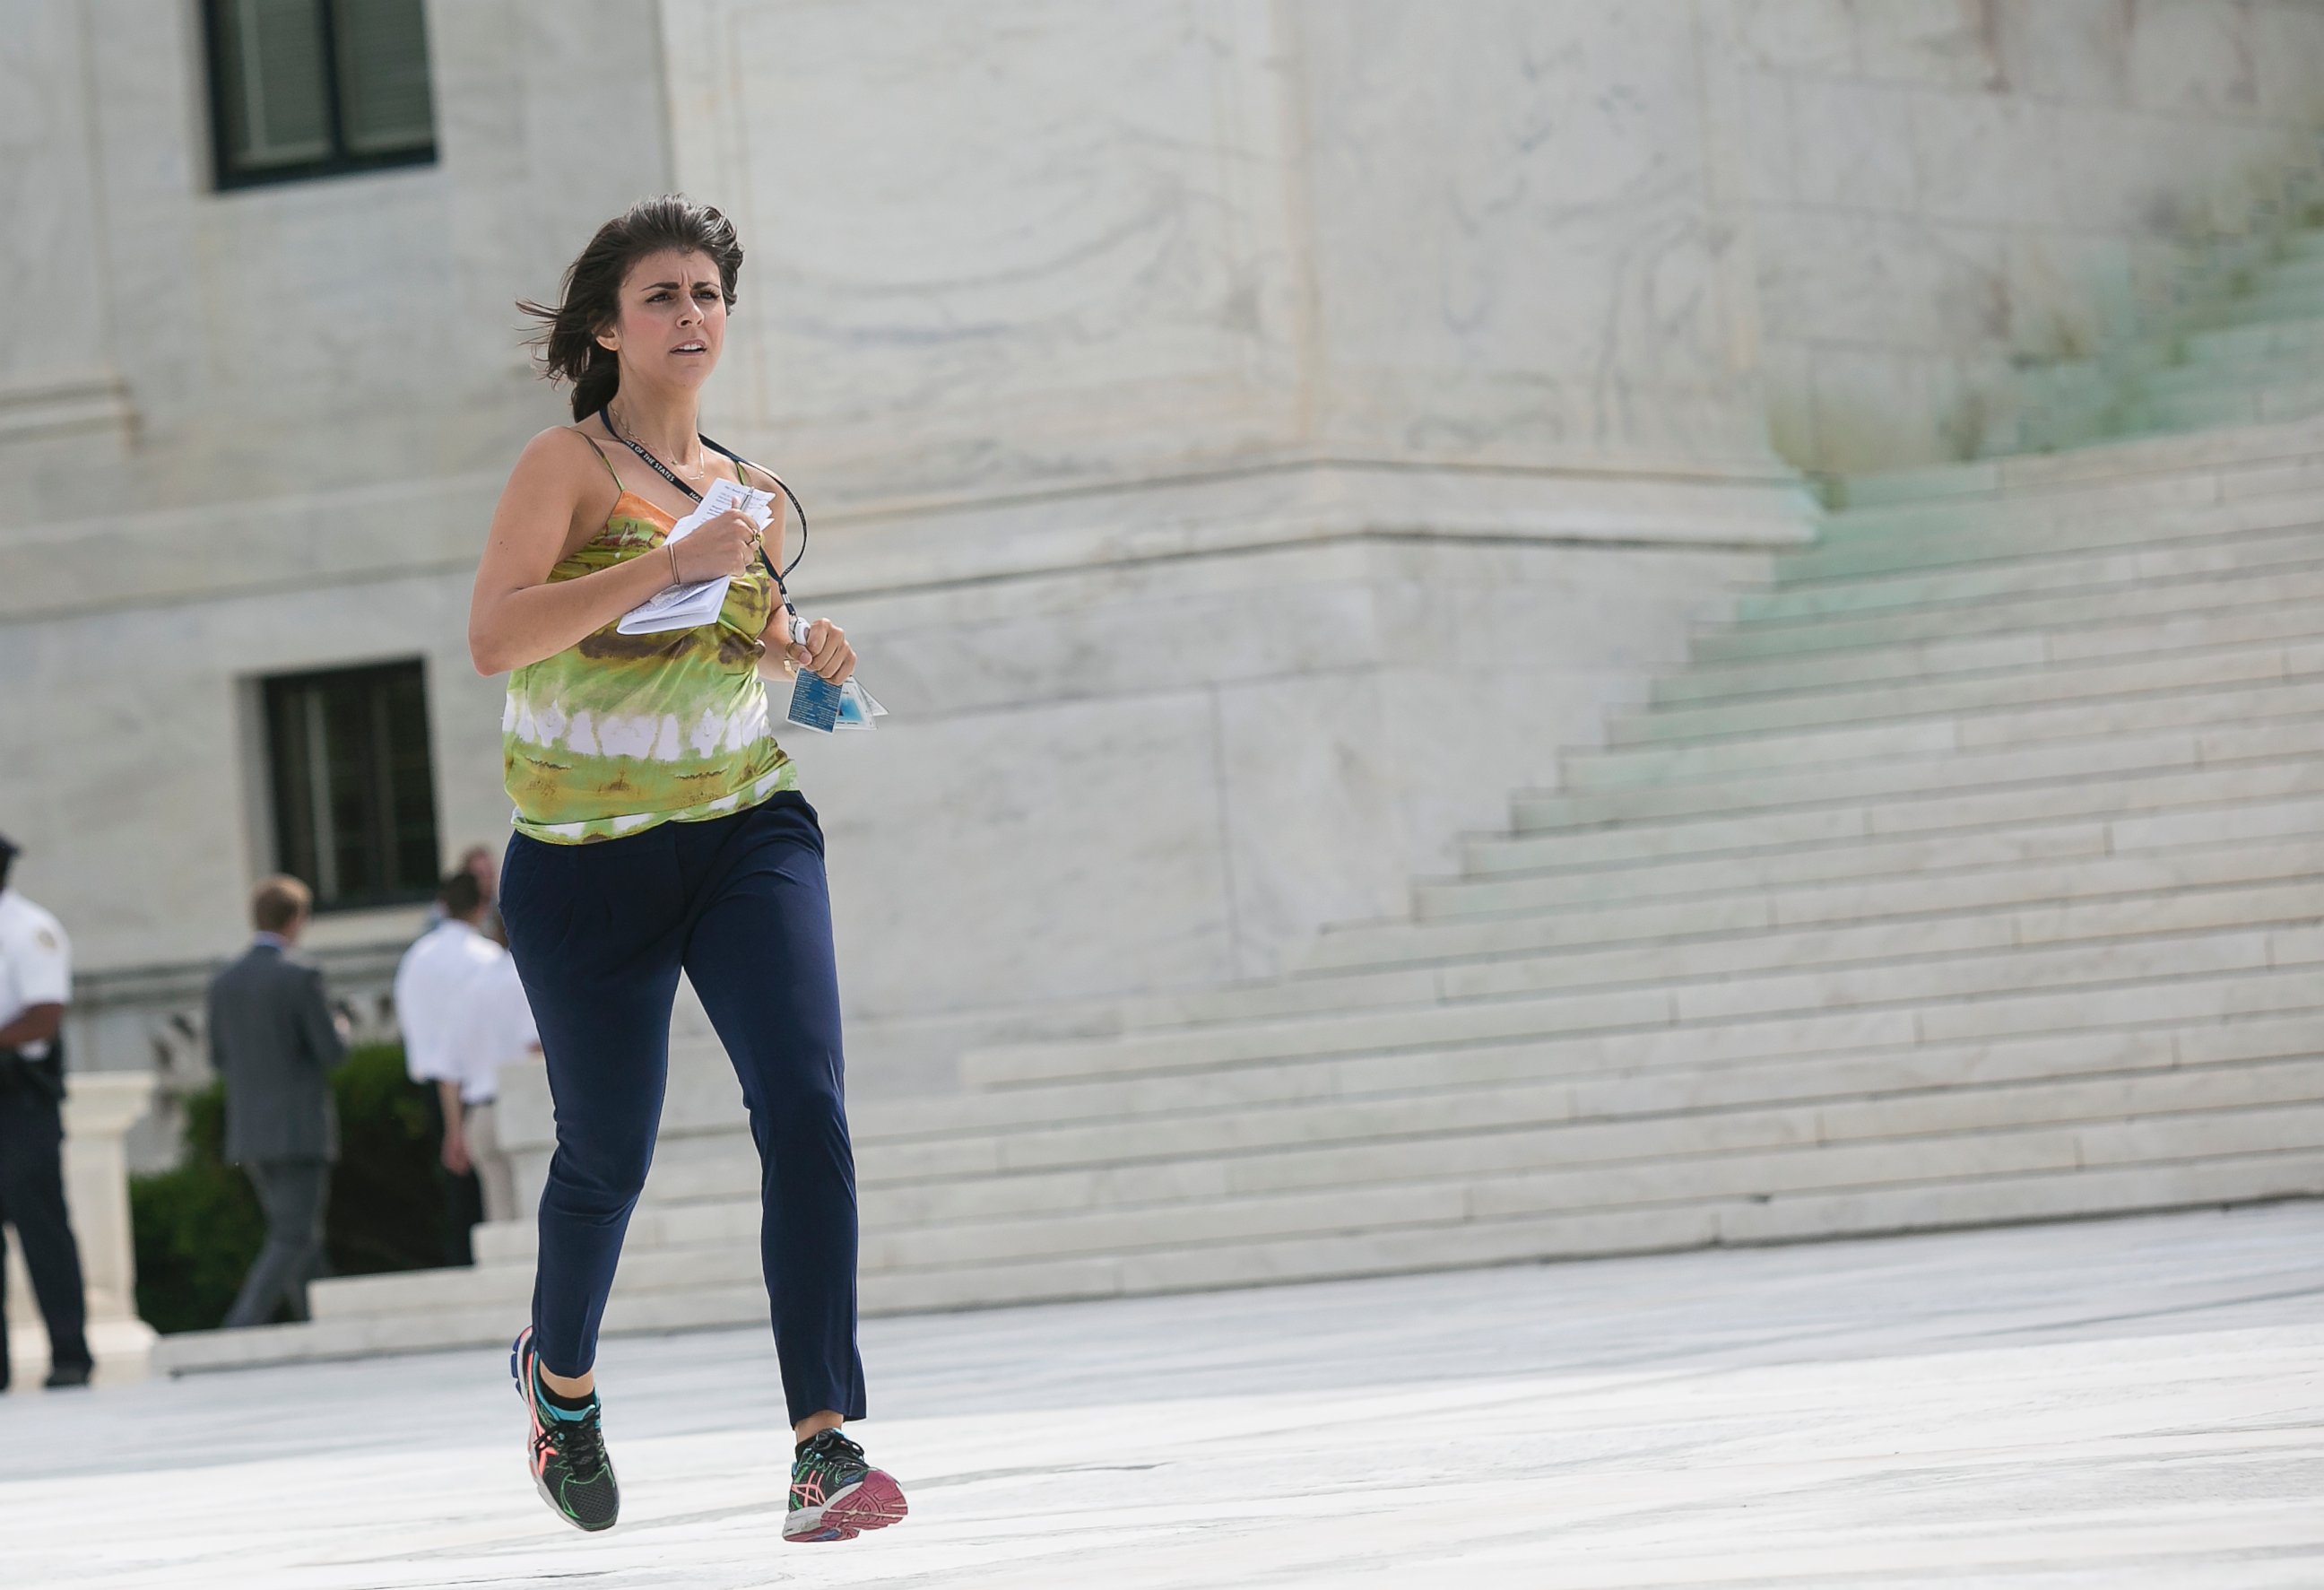 PHOTO: Members of the news media, including interns for network television stations, run with decisions in hand on the opinion for health care in Washington, June 25, 2015, in an official tradition referred to as the "running of the interns.